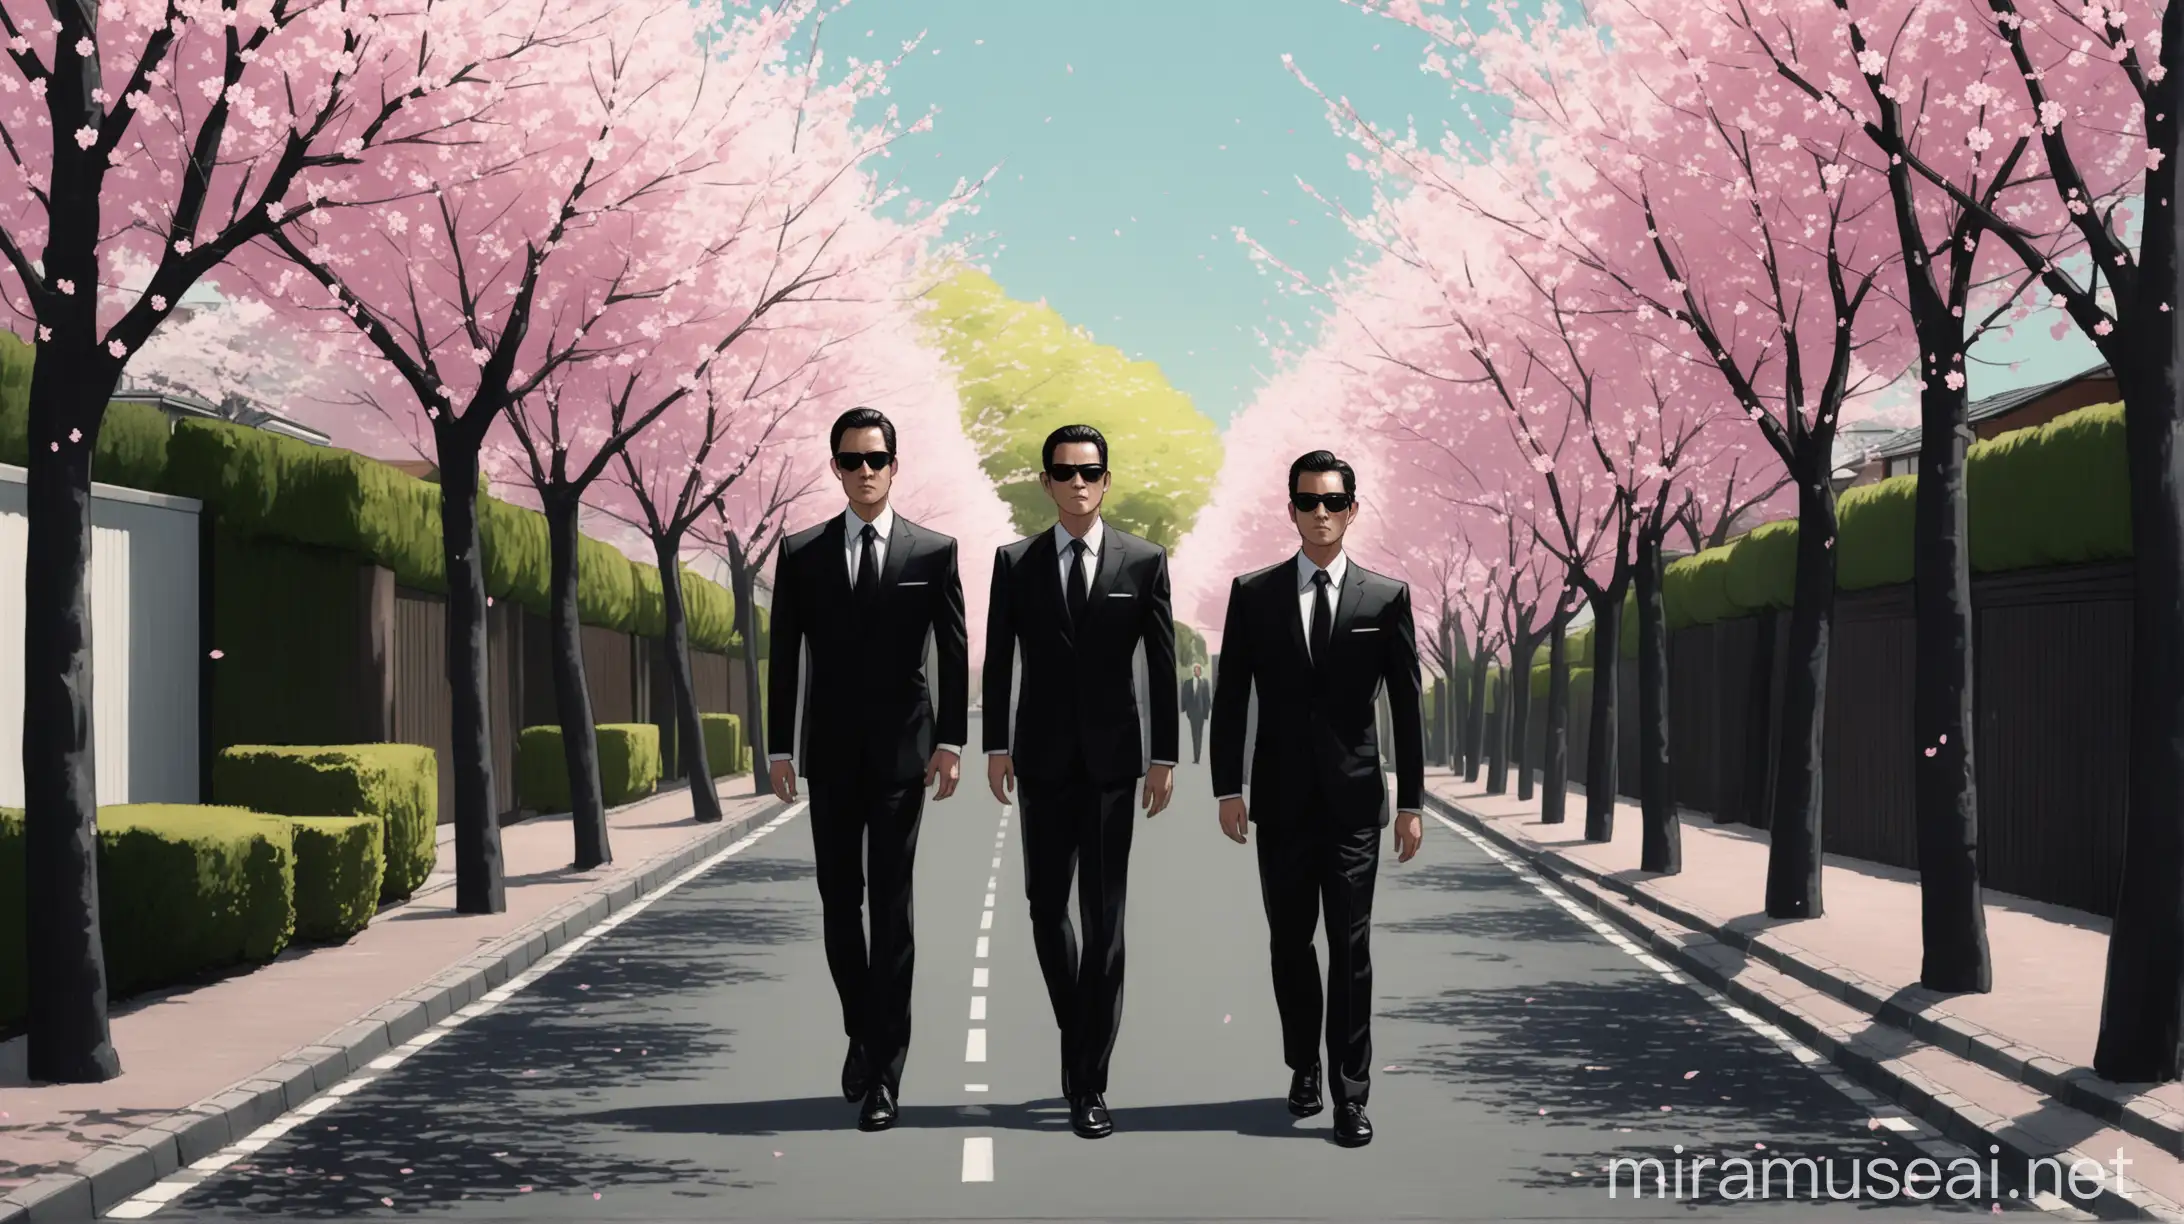 Mysterious Trio in Black Suits Among Cherry Blossoms